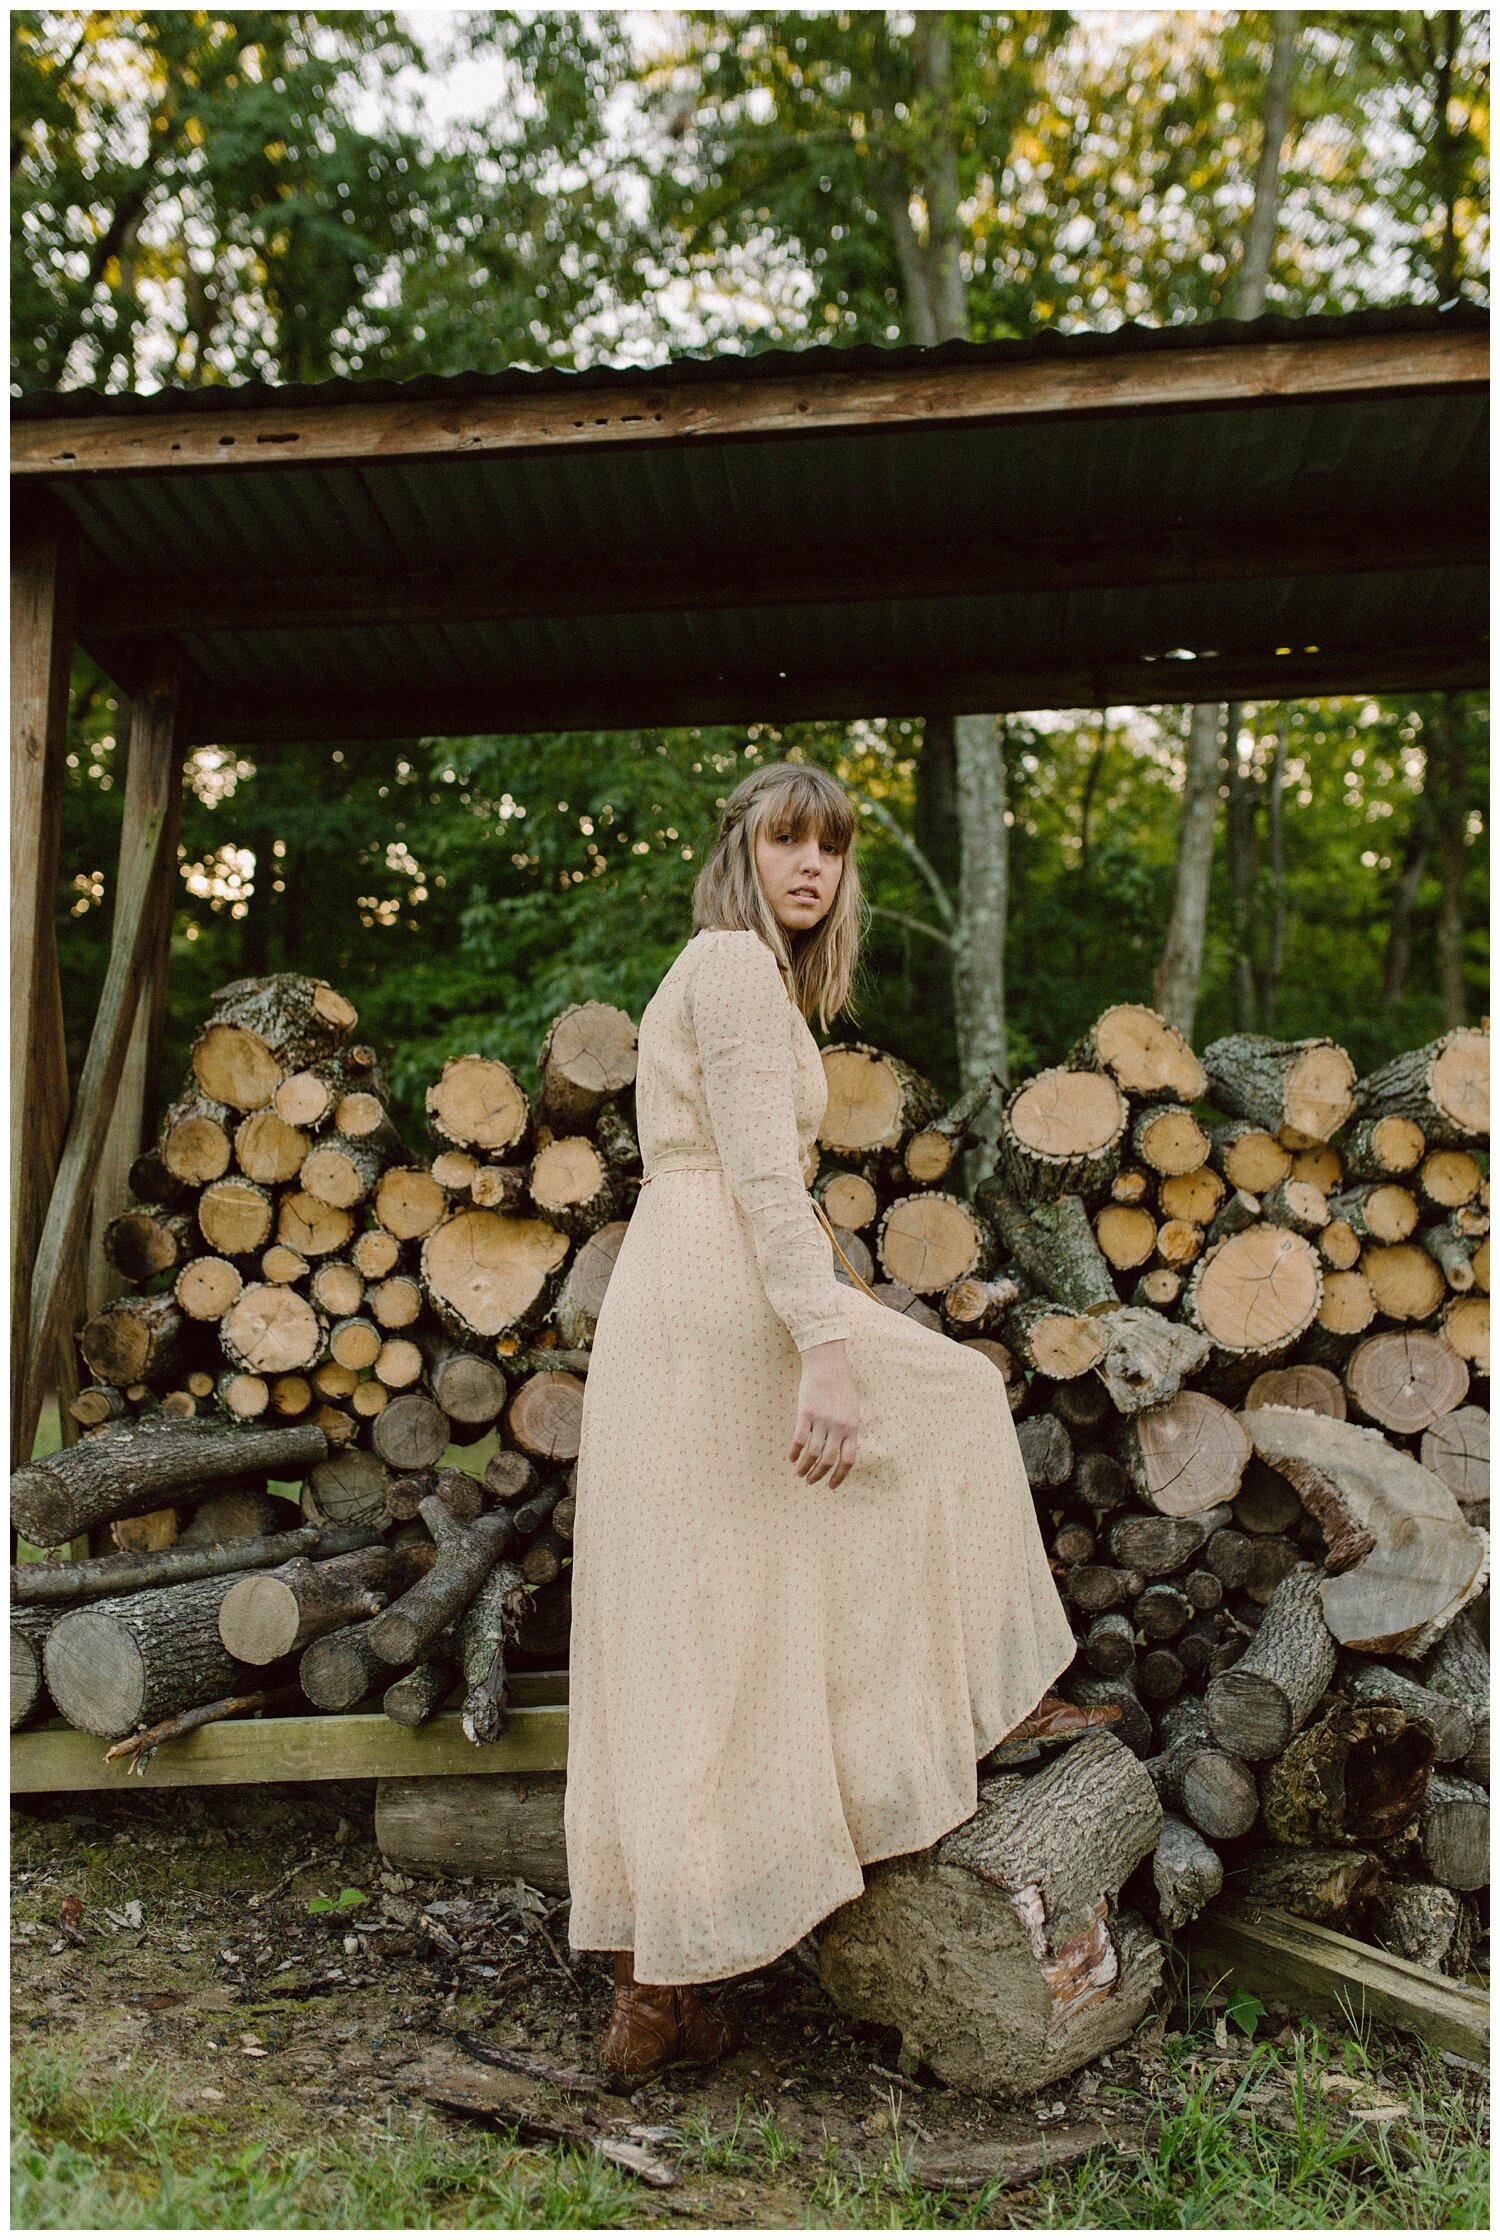 Kendra_Farris_Photography_folklore.inspired.photoshoot.taylor.swift-29.jpg